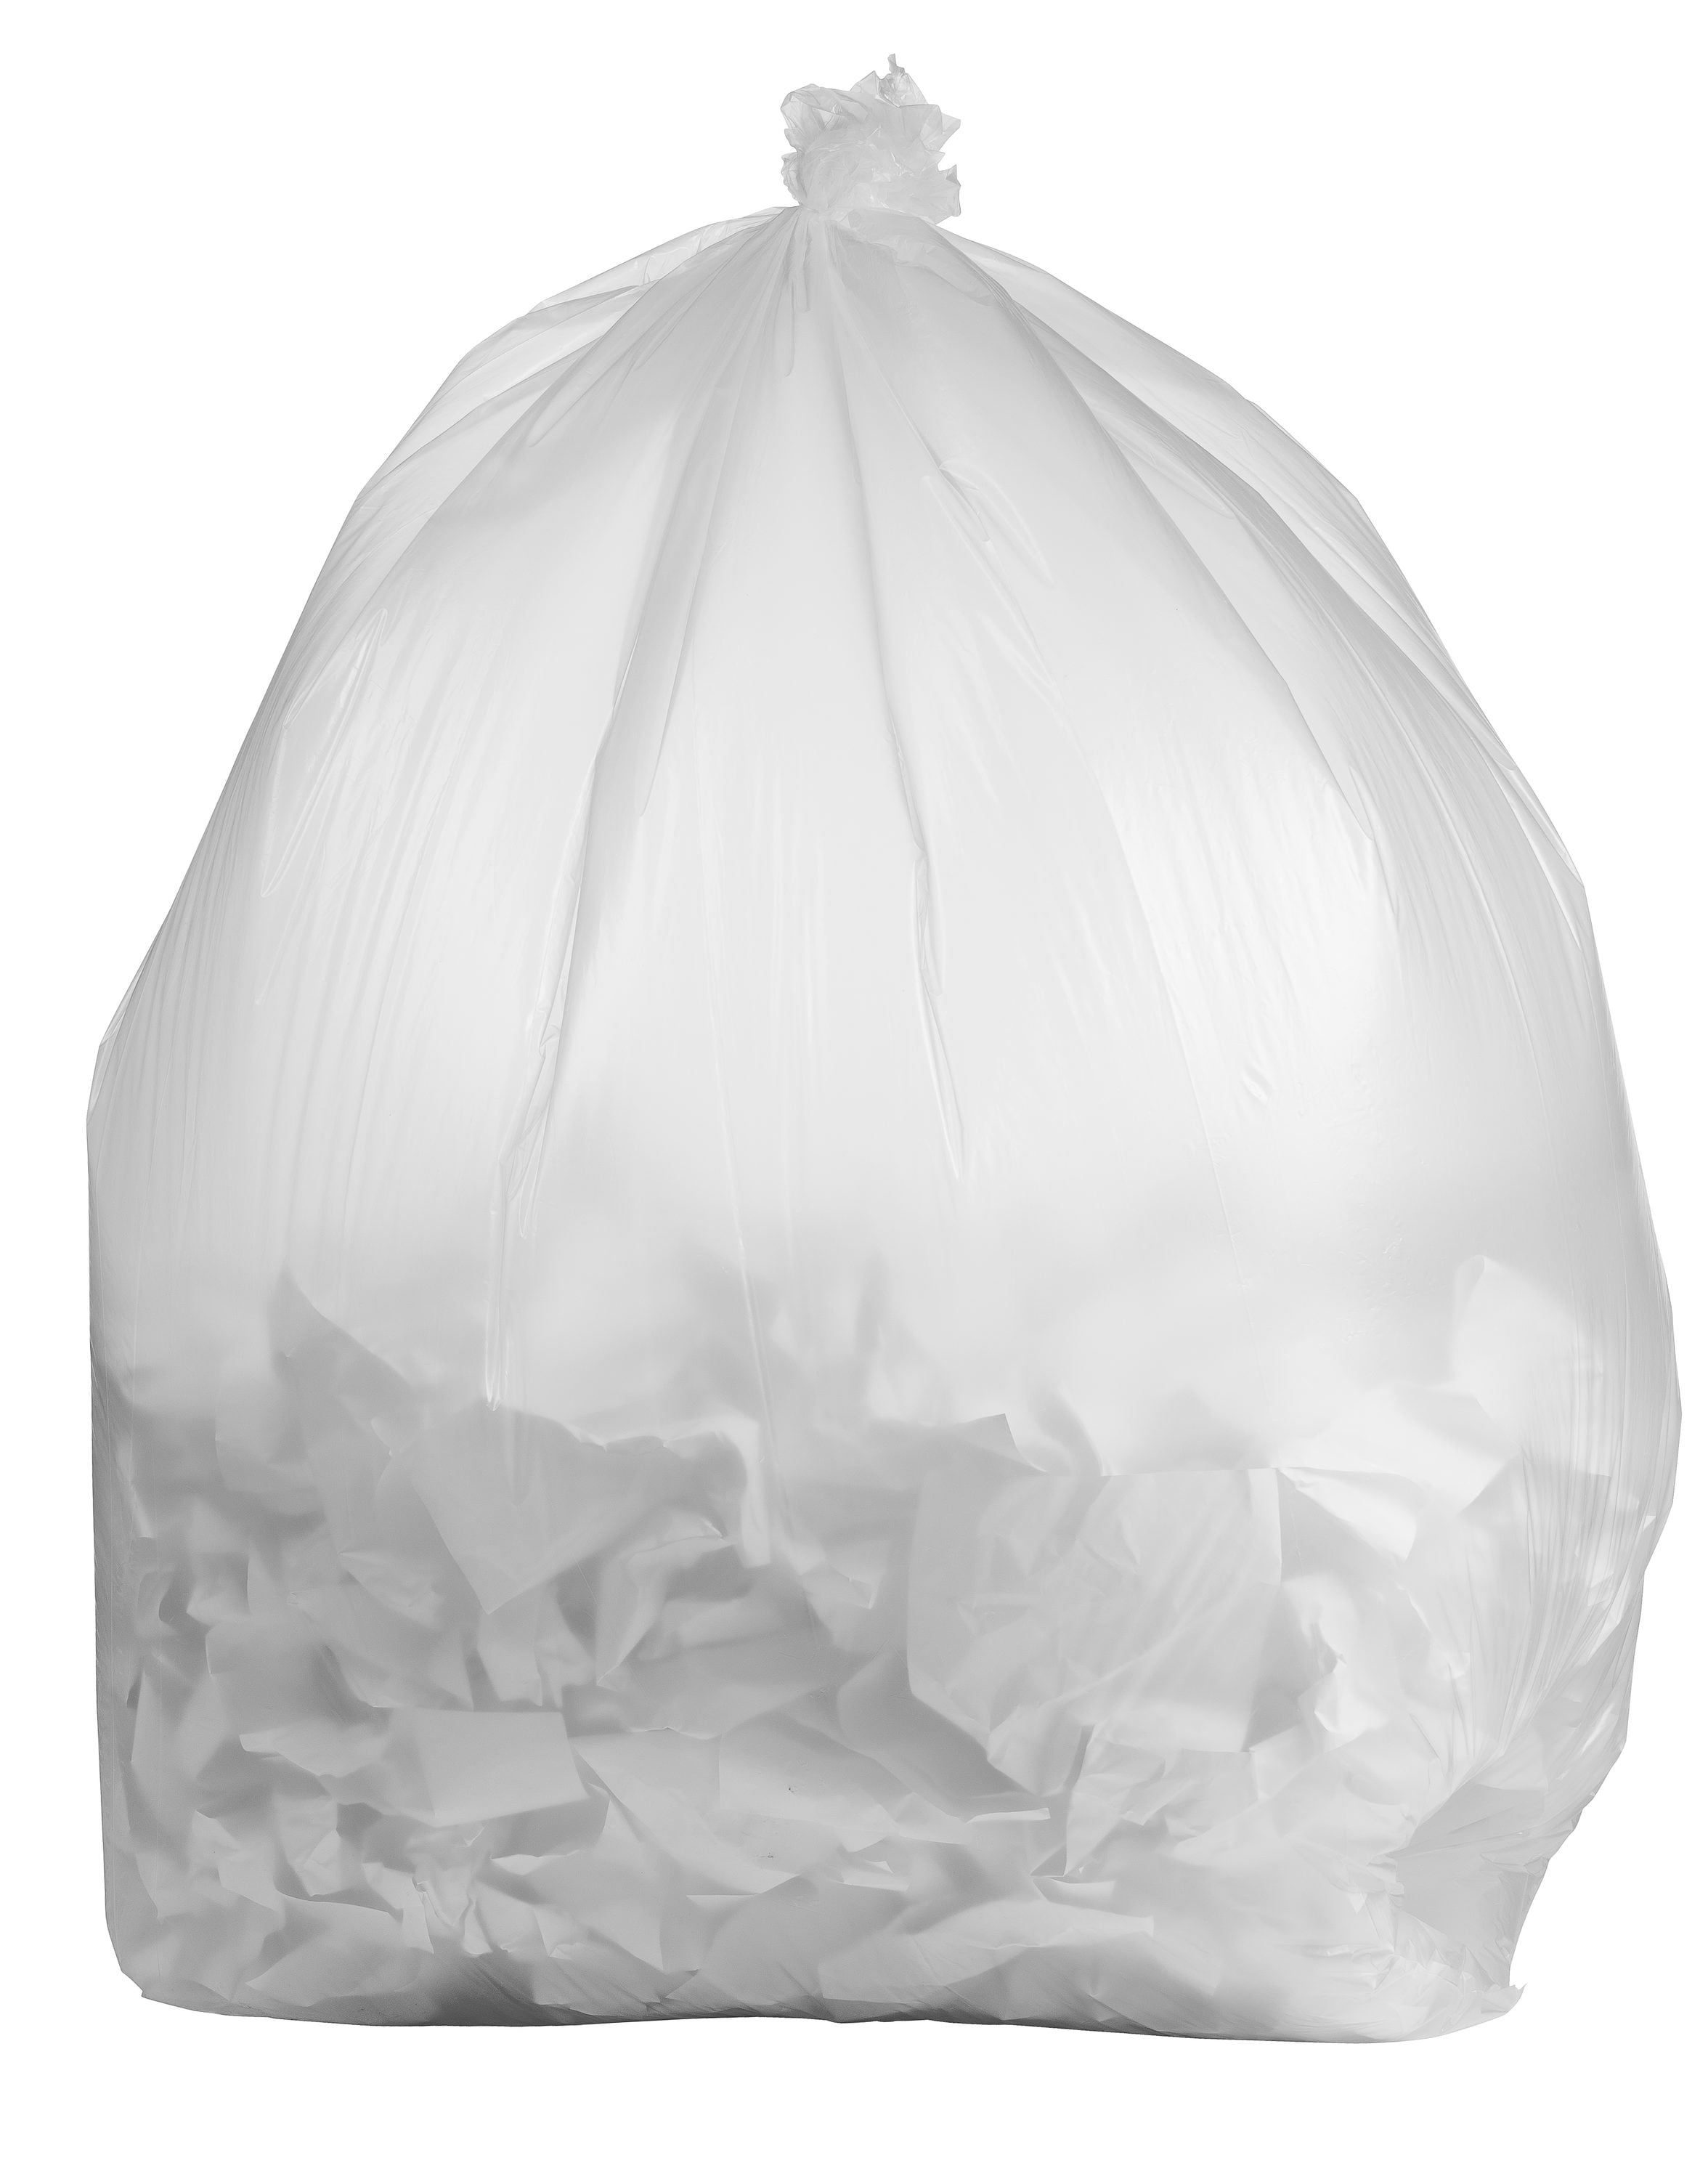 PlasticMill 50-Pack 55-Gallons Clear Outdoor Plastic Construction Trash Bag